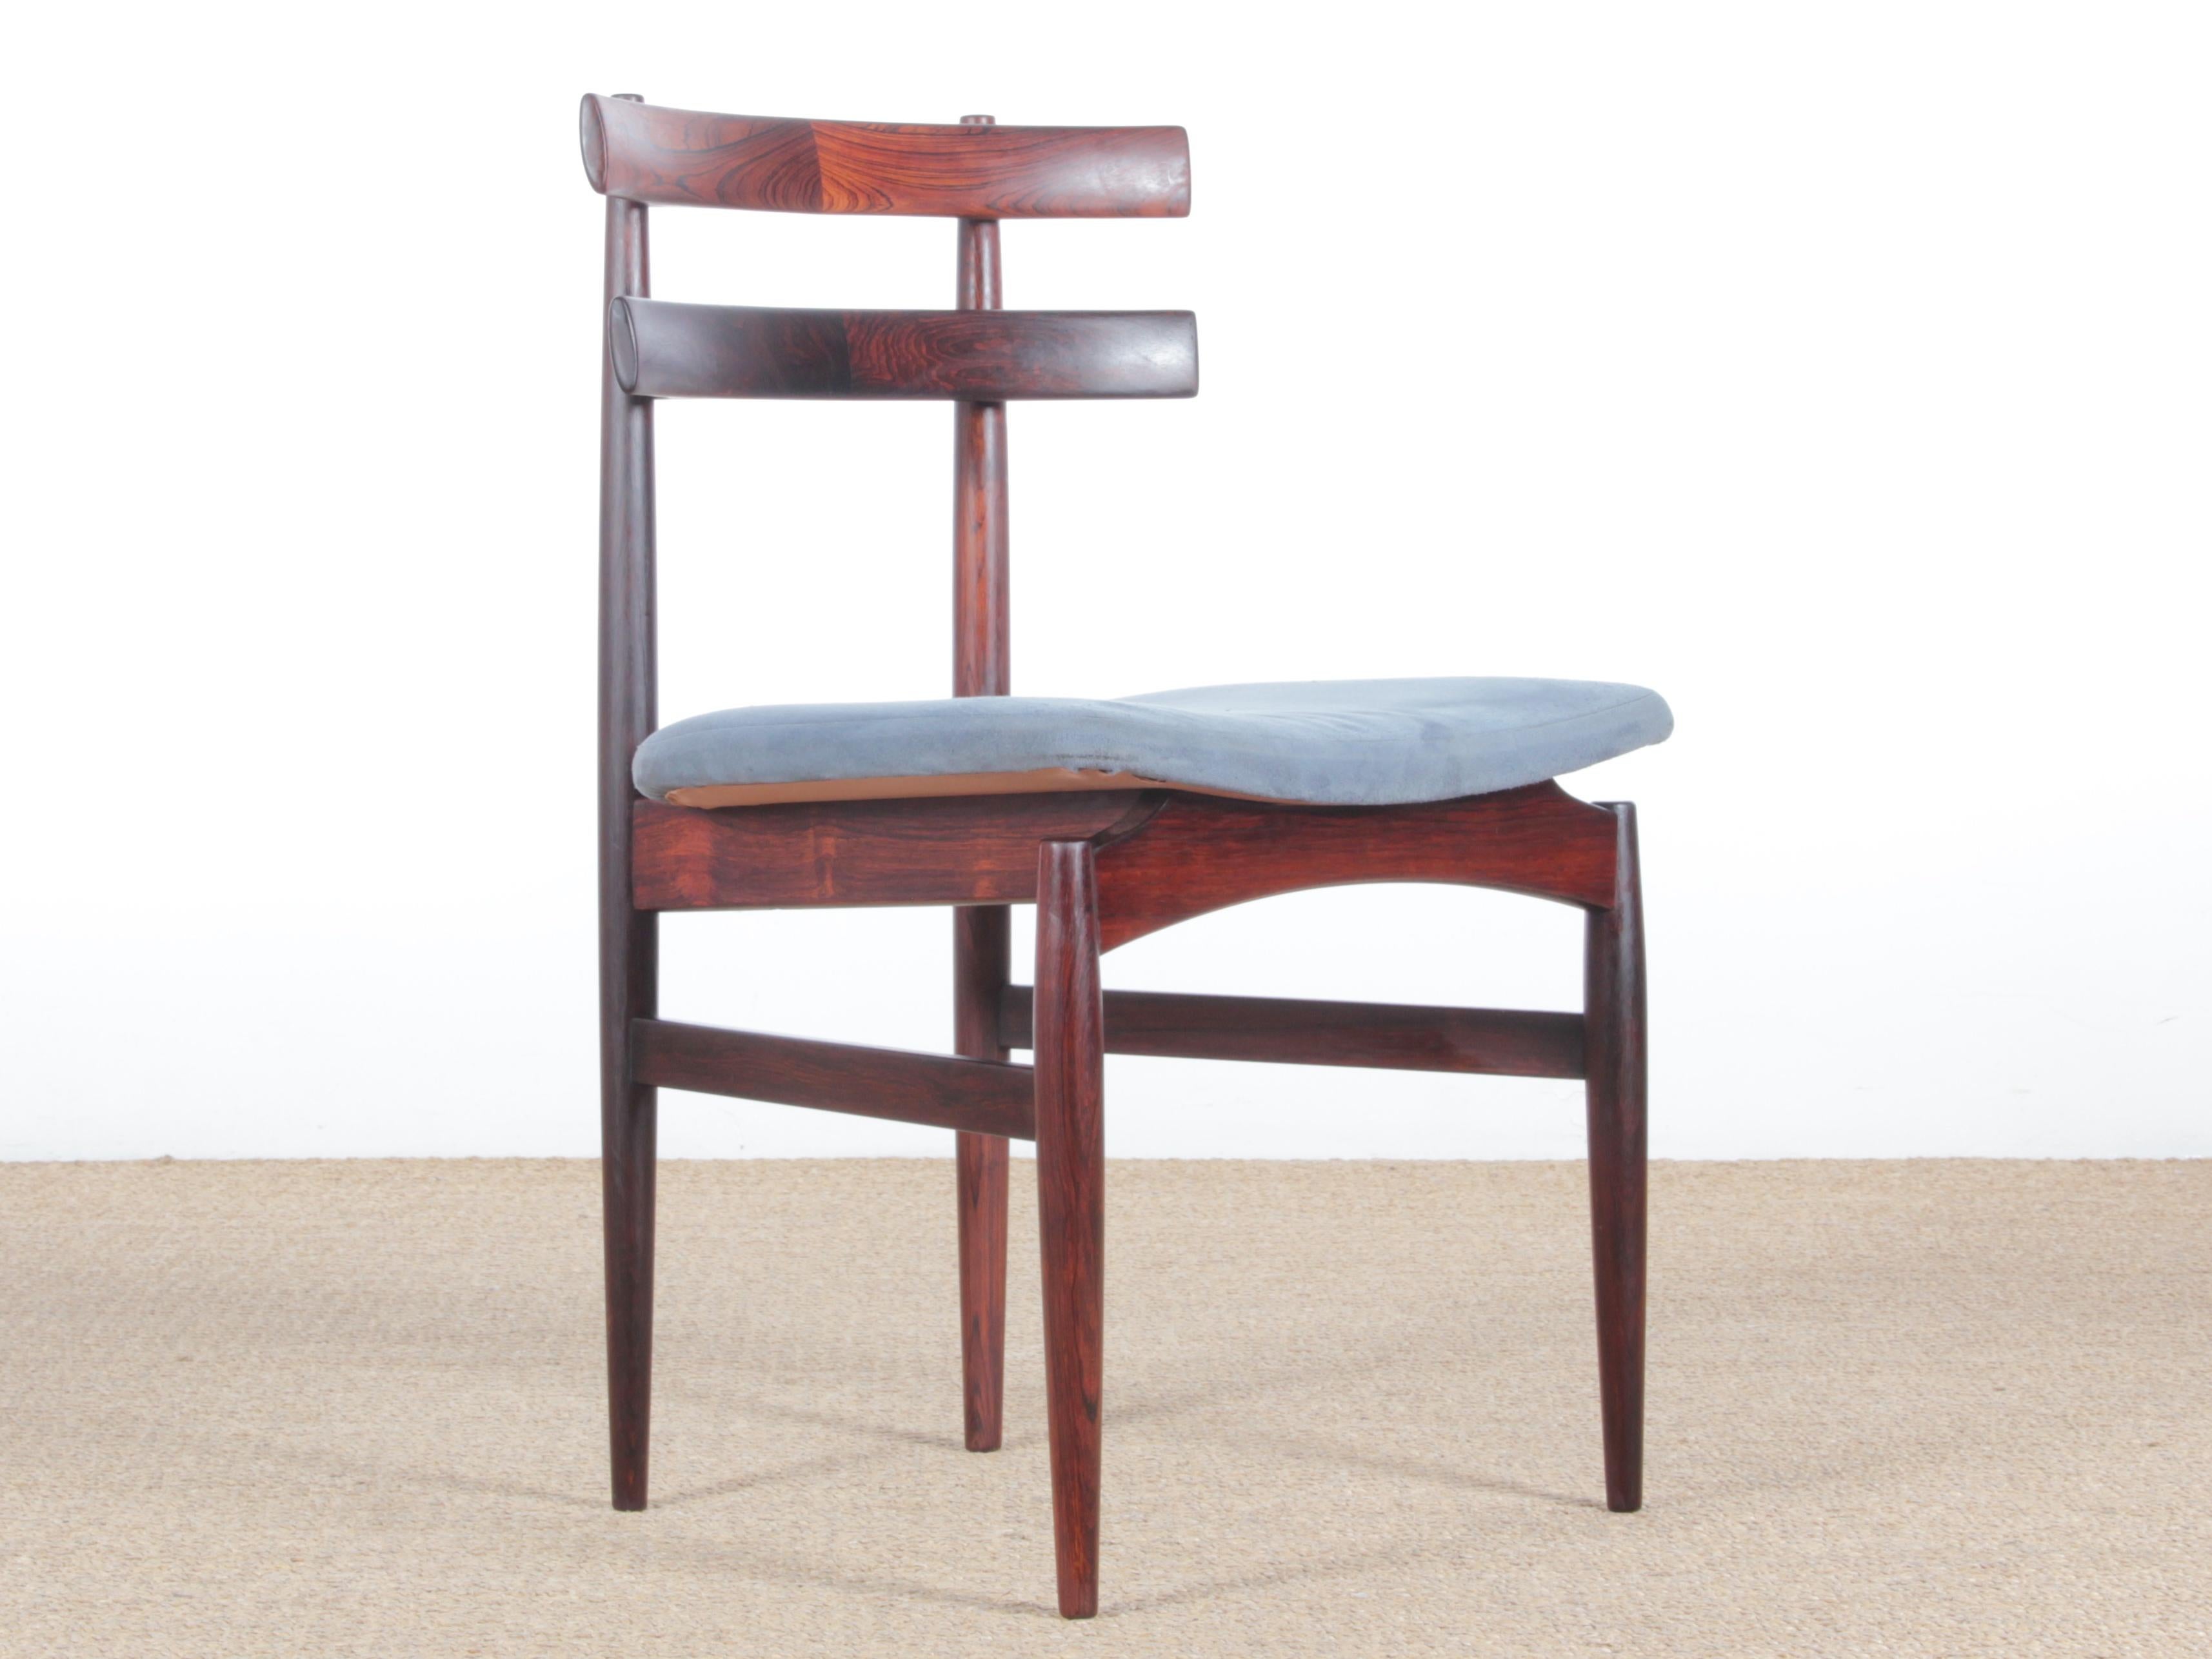 Mid-20th Century Mid-Century Modern Danish Set of Six Chairs in Rosewood by Poul Hundevad For Sale